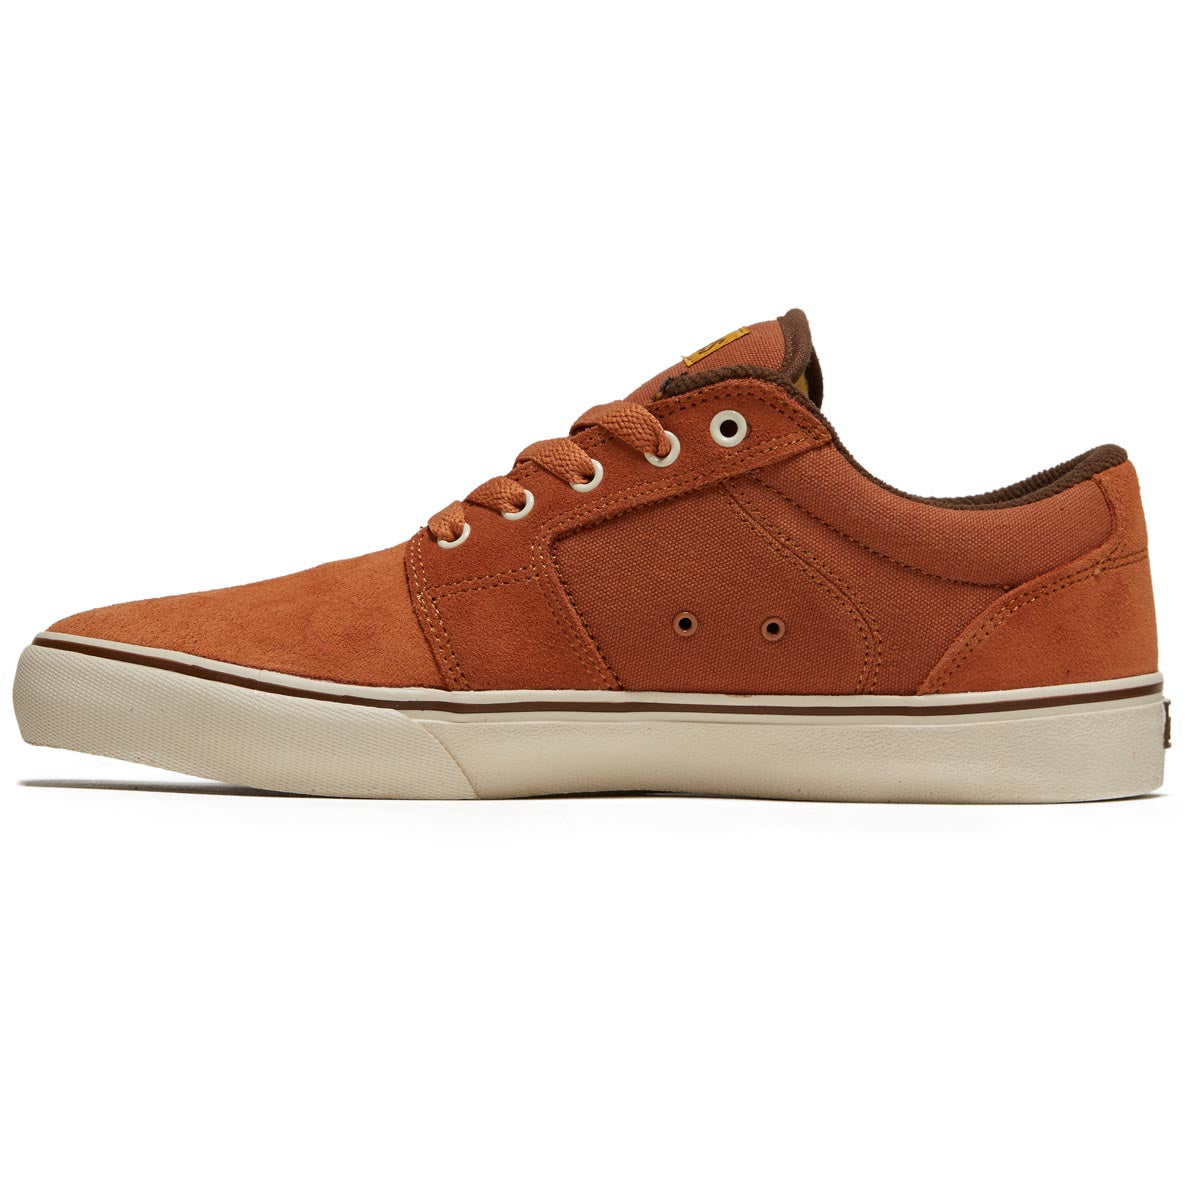 Etnies Barge Ls Shoes - Brown/Gold/Yellow image 2